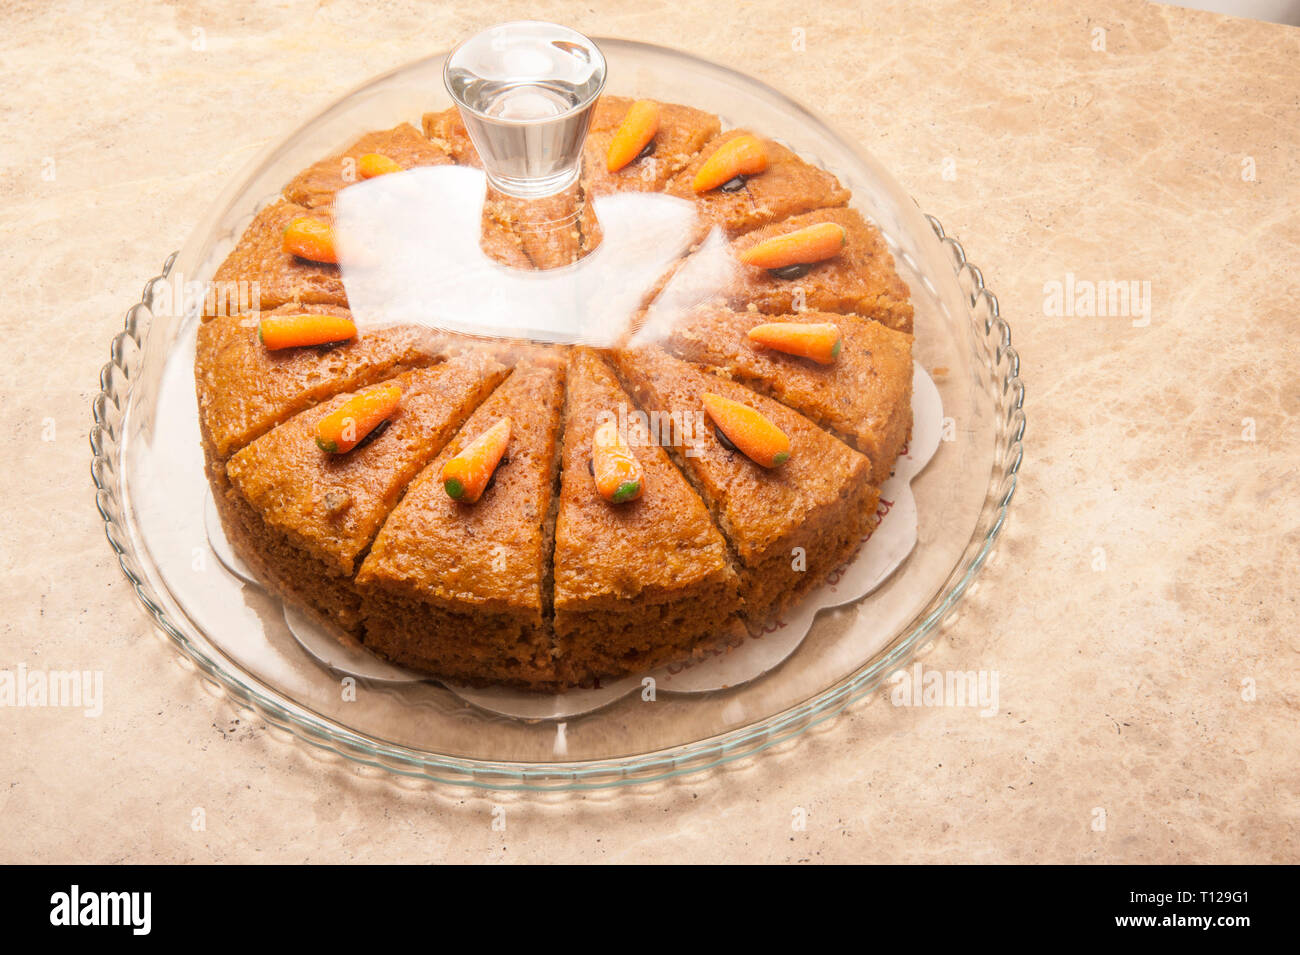 Carrot cake ready to be served. Triangle-sliced carrot cake is the favorite dessert of people especially those who are fond of taste. Stock Photo